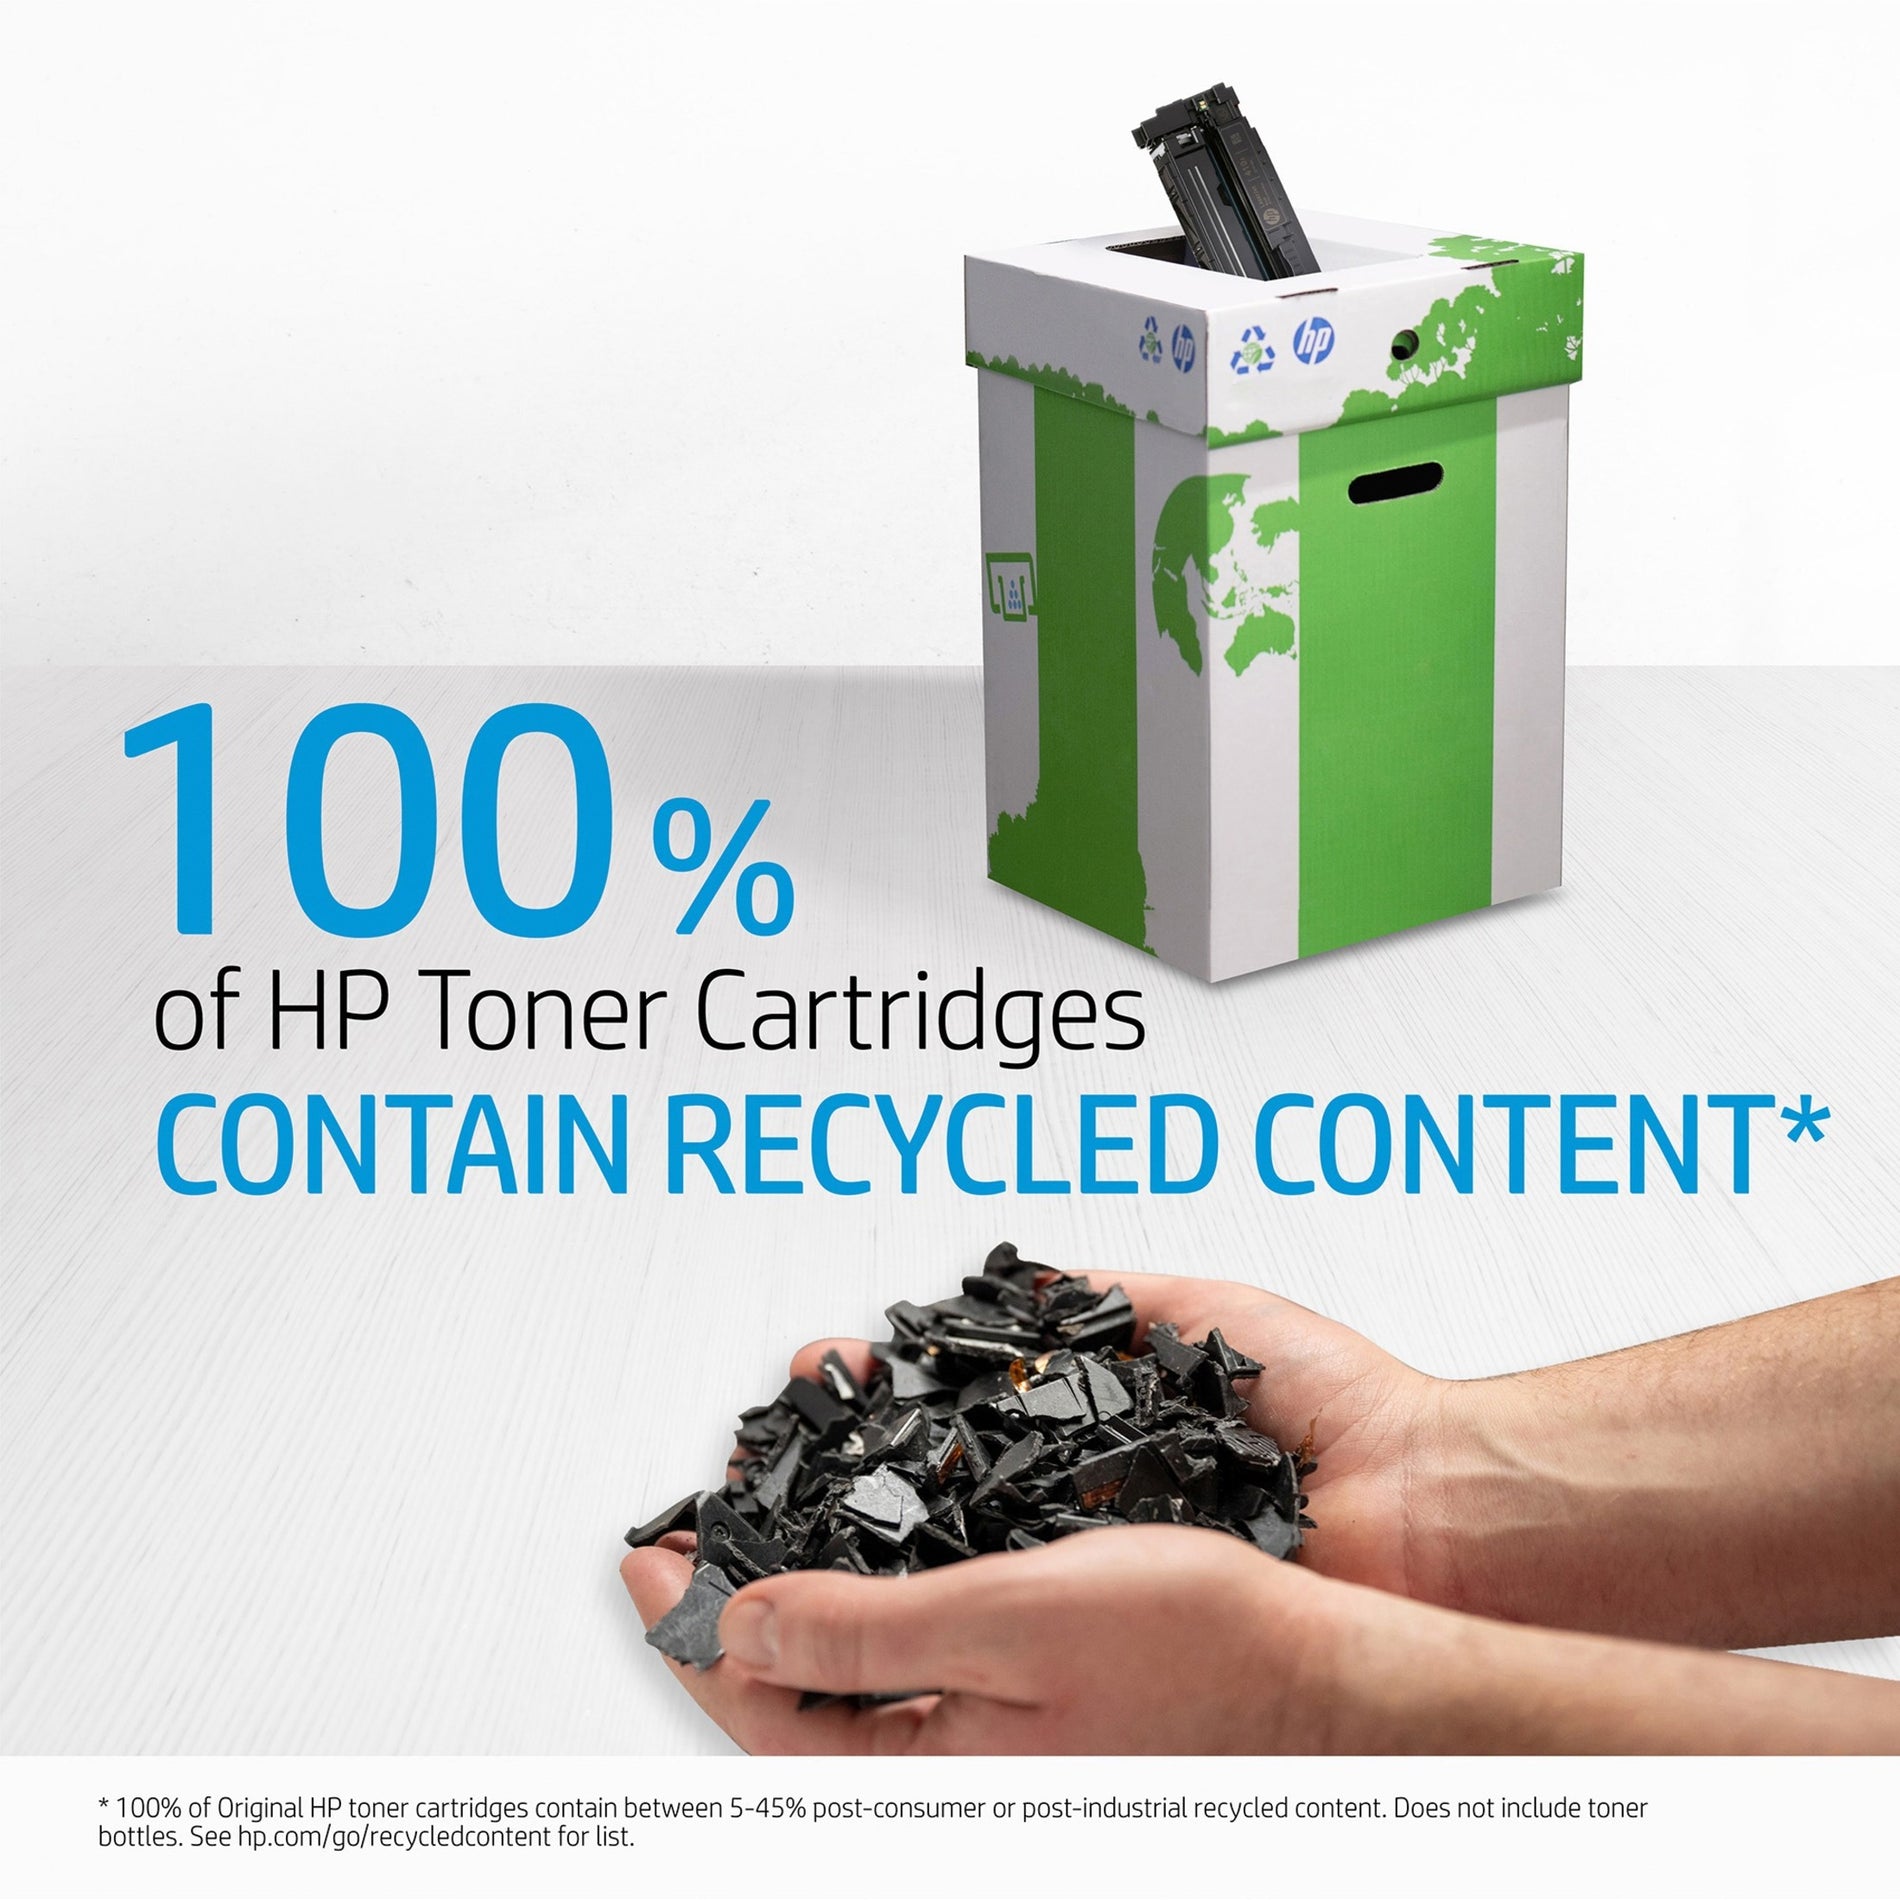 HP C9723A 641A Magenta Toner Cartridge, 8000 Page Yield